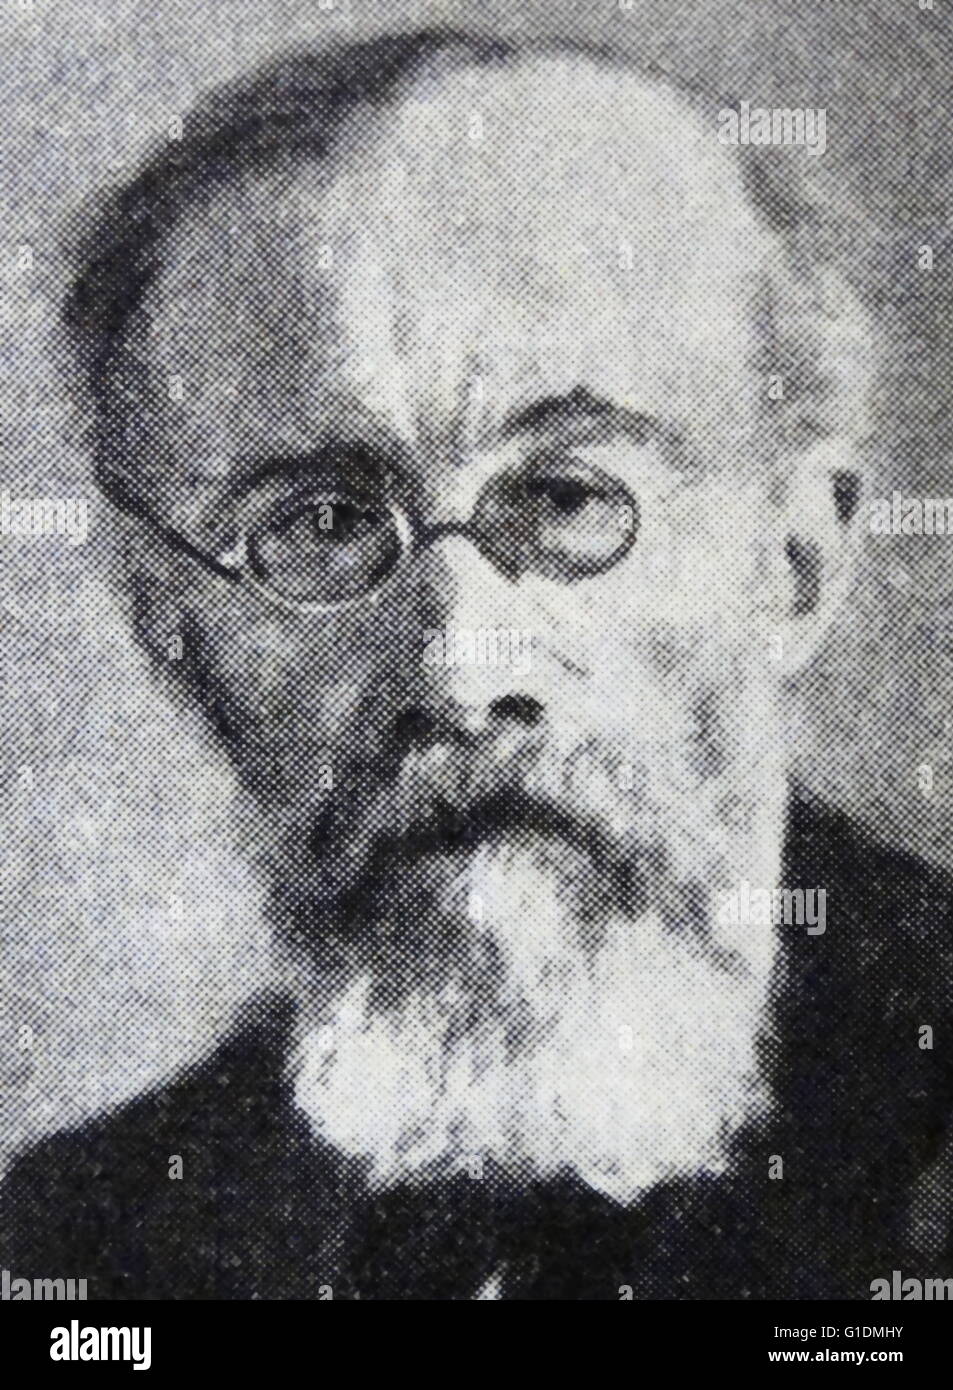 Photographic portrait of Wilhelm Wundt (1832-1920) a German physician, physiologist, Philosopher and Professor. Dated 20th Century Stock Photo